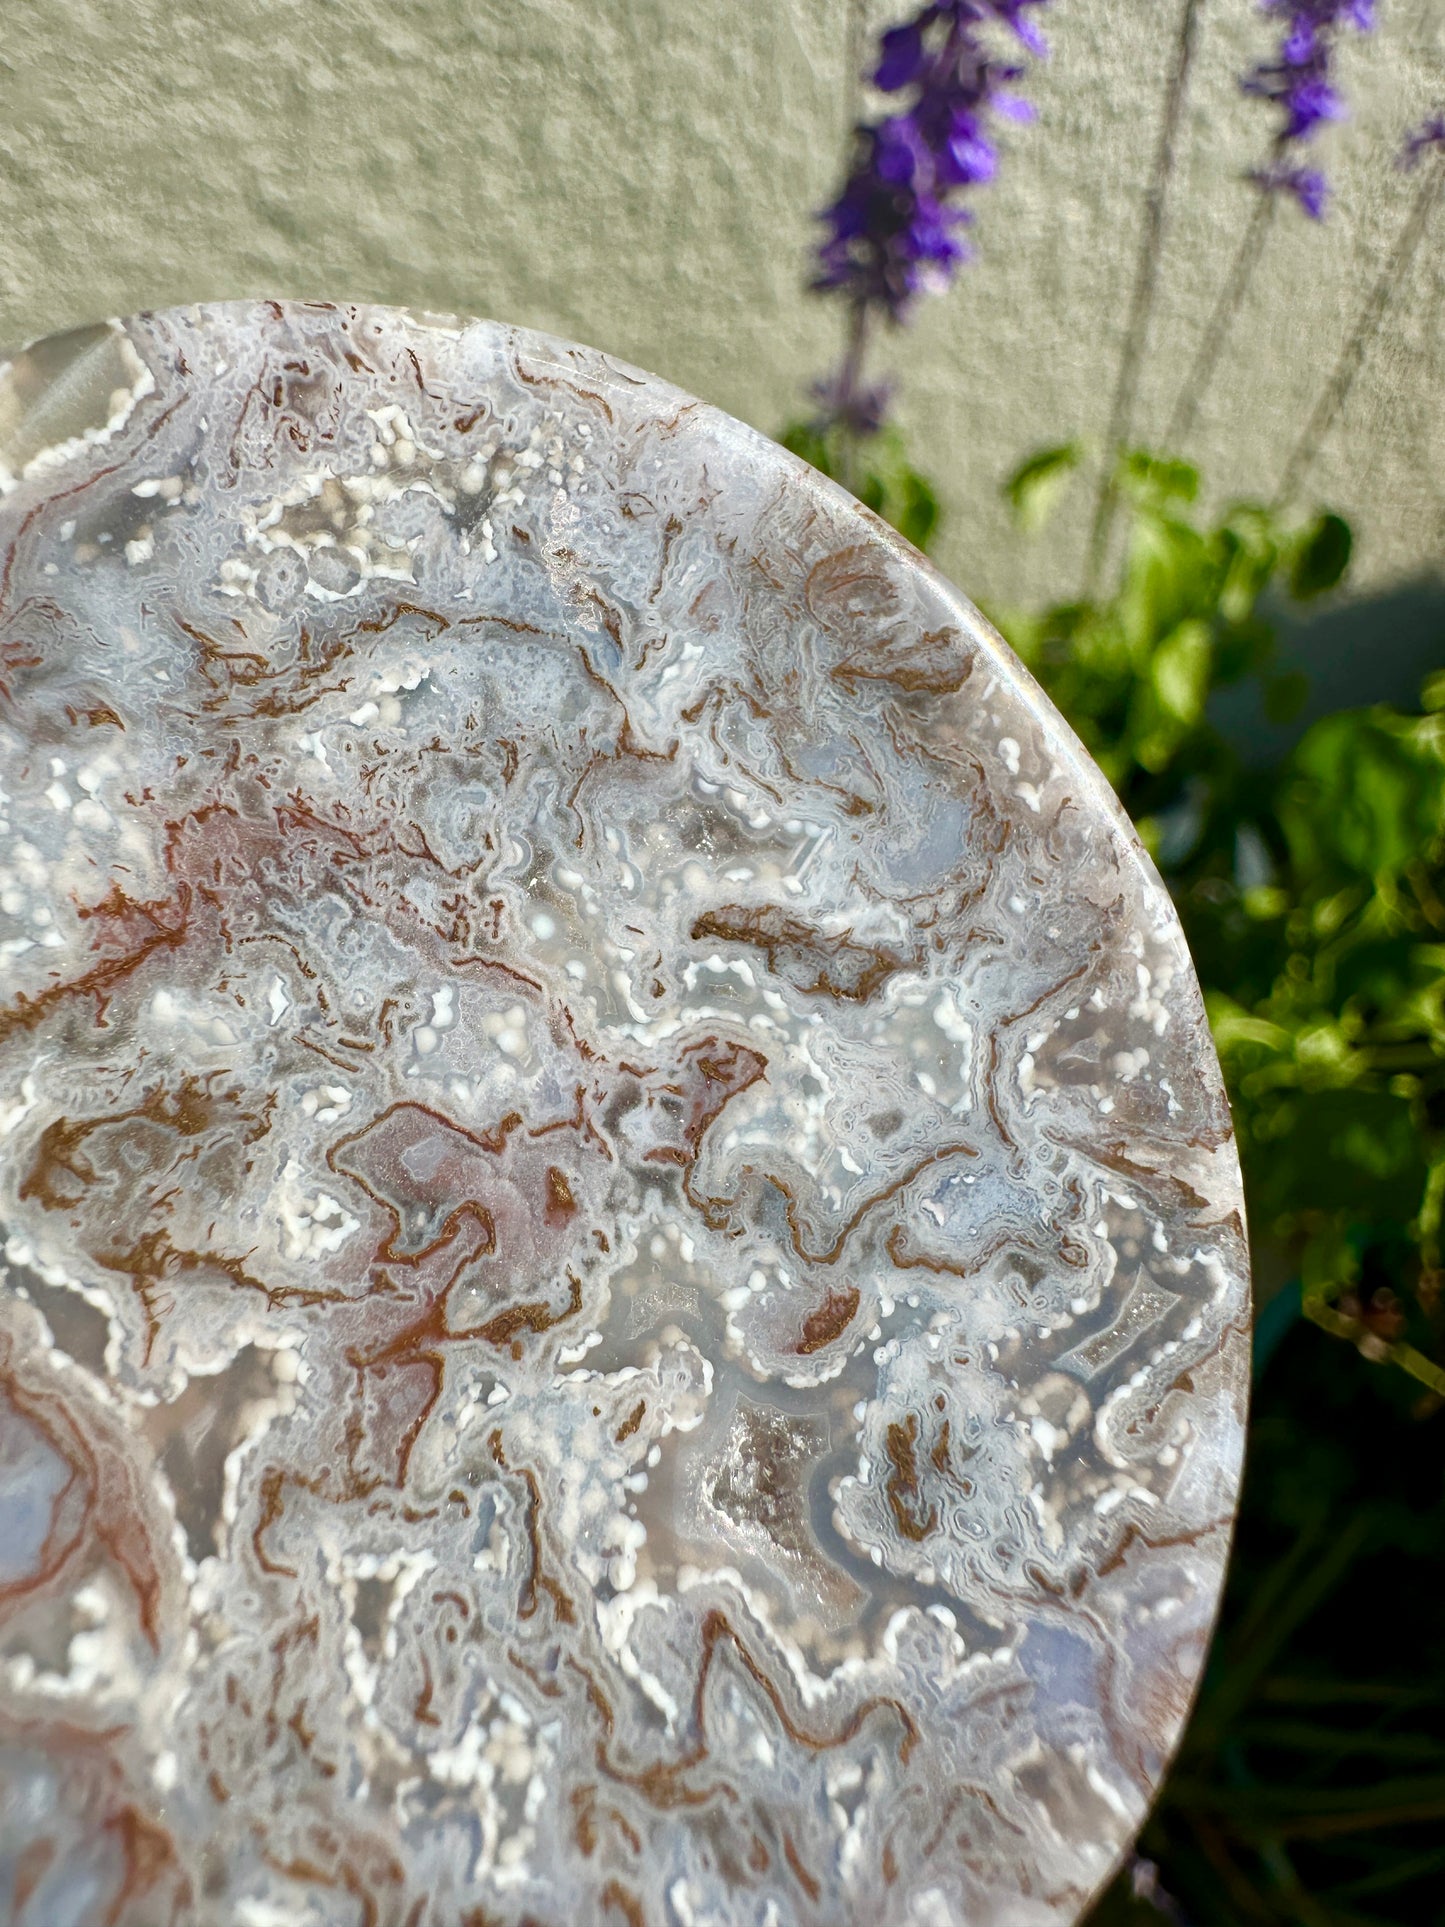 Stunning Ocean Jasper Bowl - Unique Decorative Piece for Home or Office, Enhance Your Space with Natural Earthy Tones